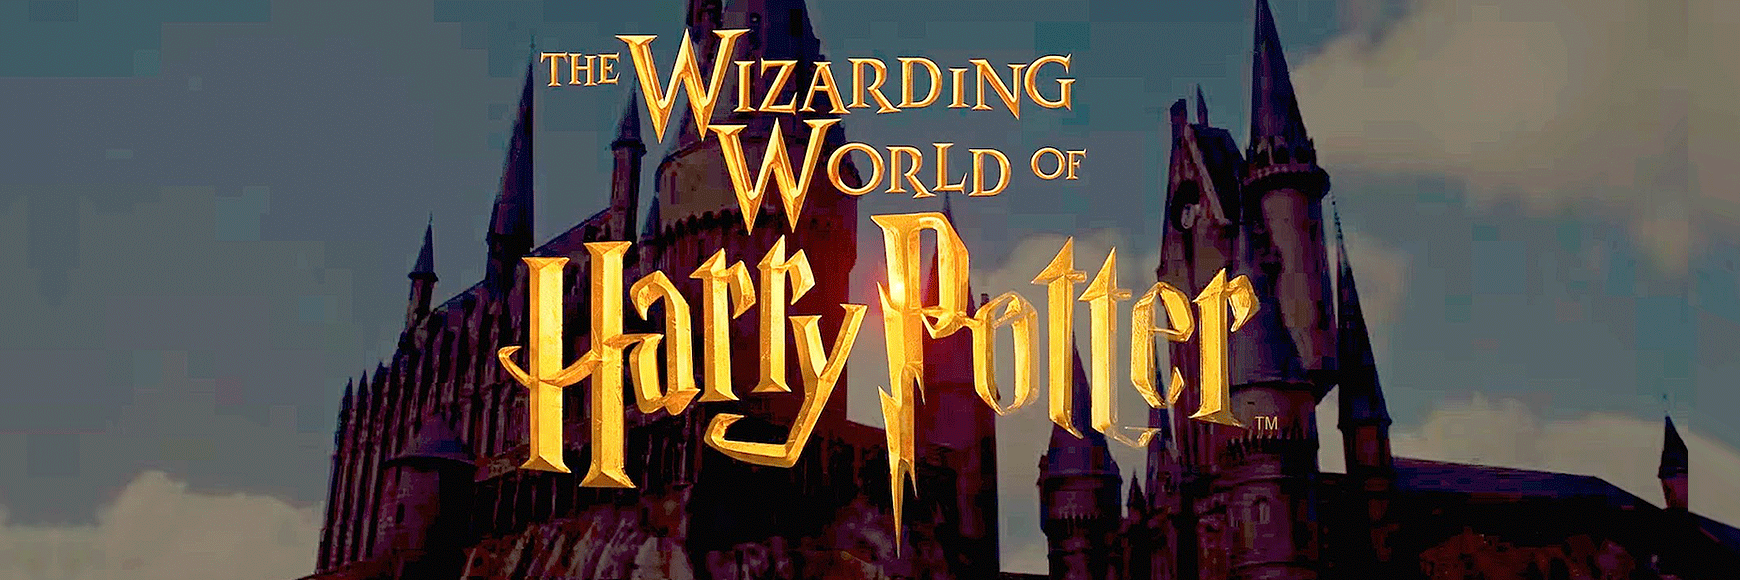 The best rides of the wizarding world of Harry Potter -Orlando Vacation